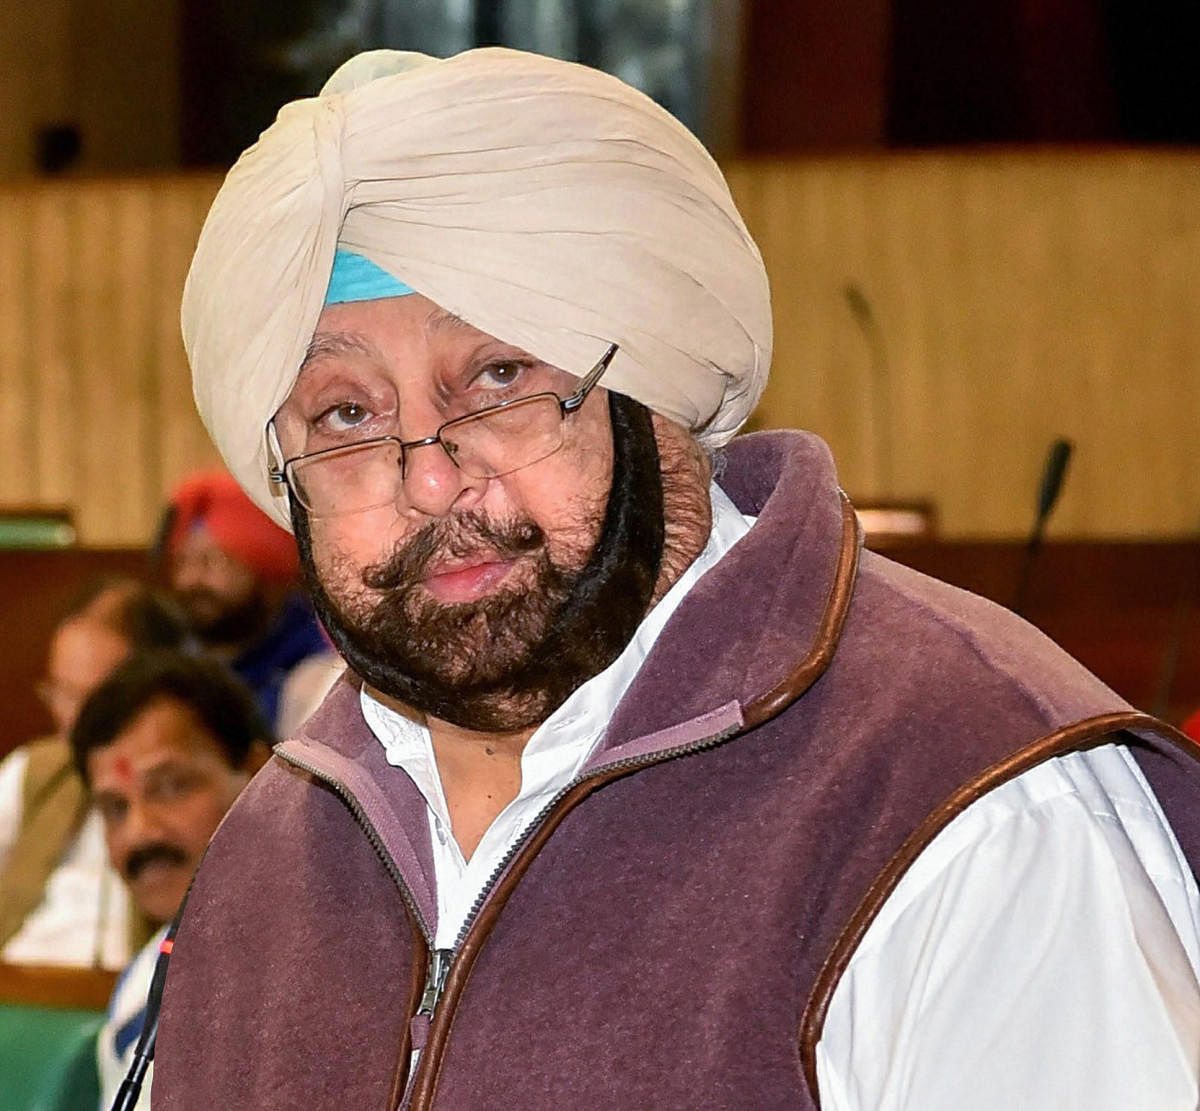 His remarks come days after Punjab Finance Minister Manpreet Singh Badal, along with the finance ministers of West Bengal, Kerala, Delhi and Rajasthan, had appealed to the Union Finance Minister to release the GST compensation without any delay.